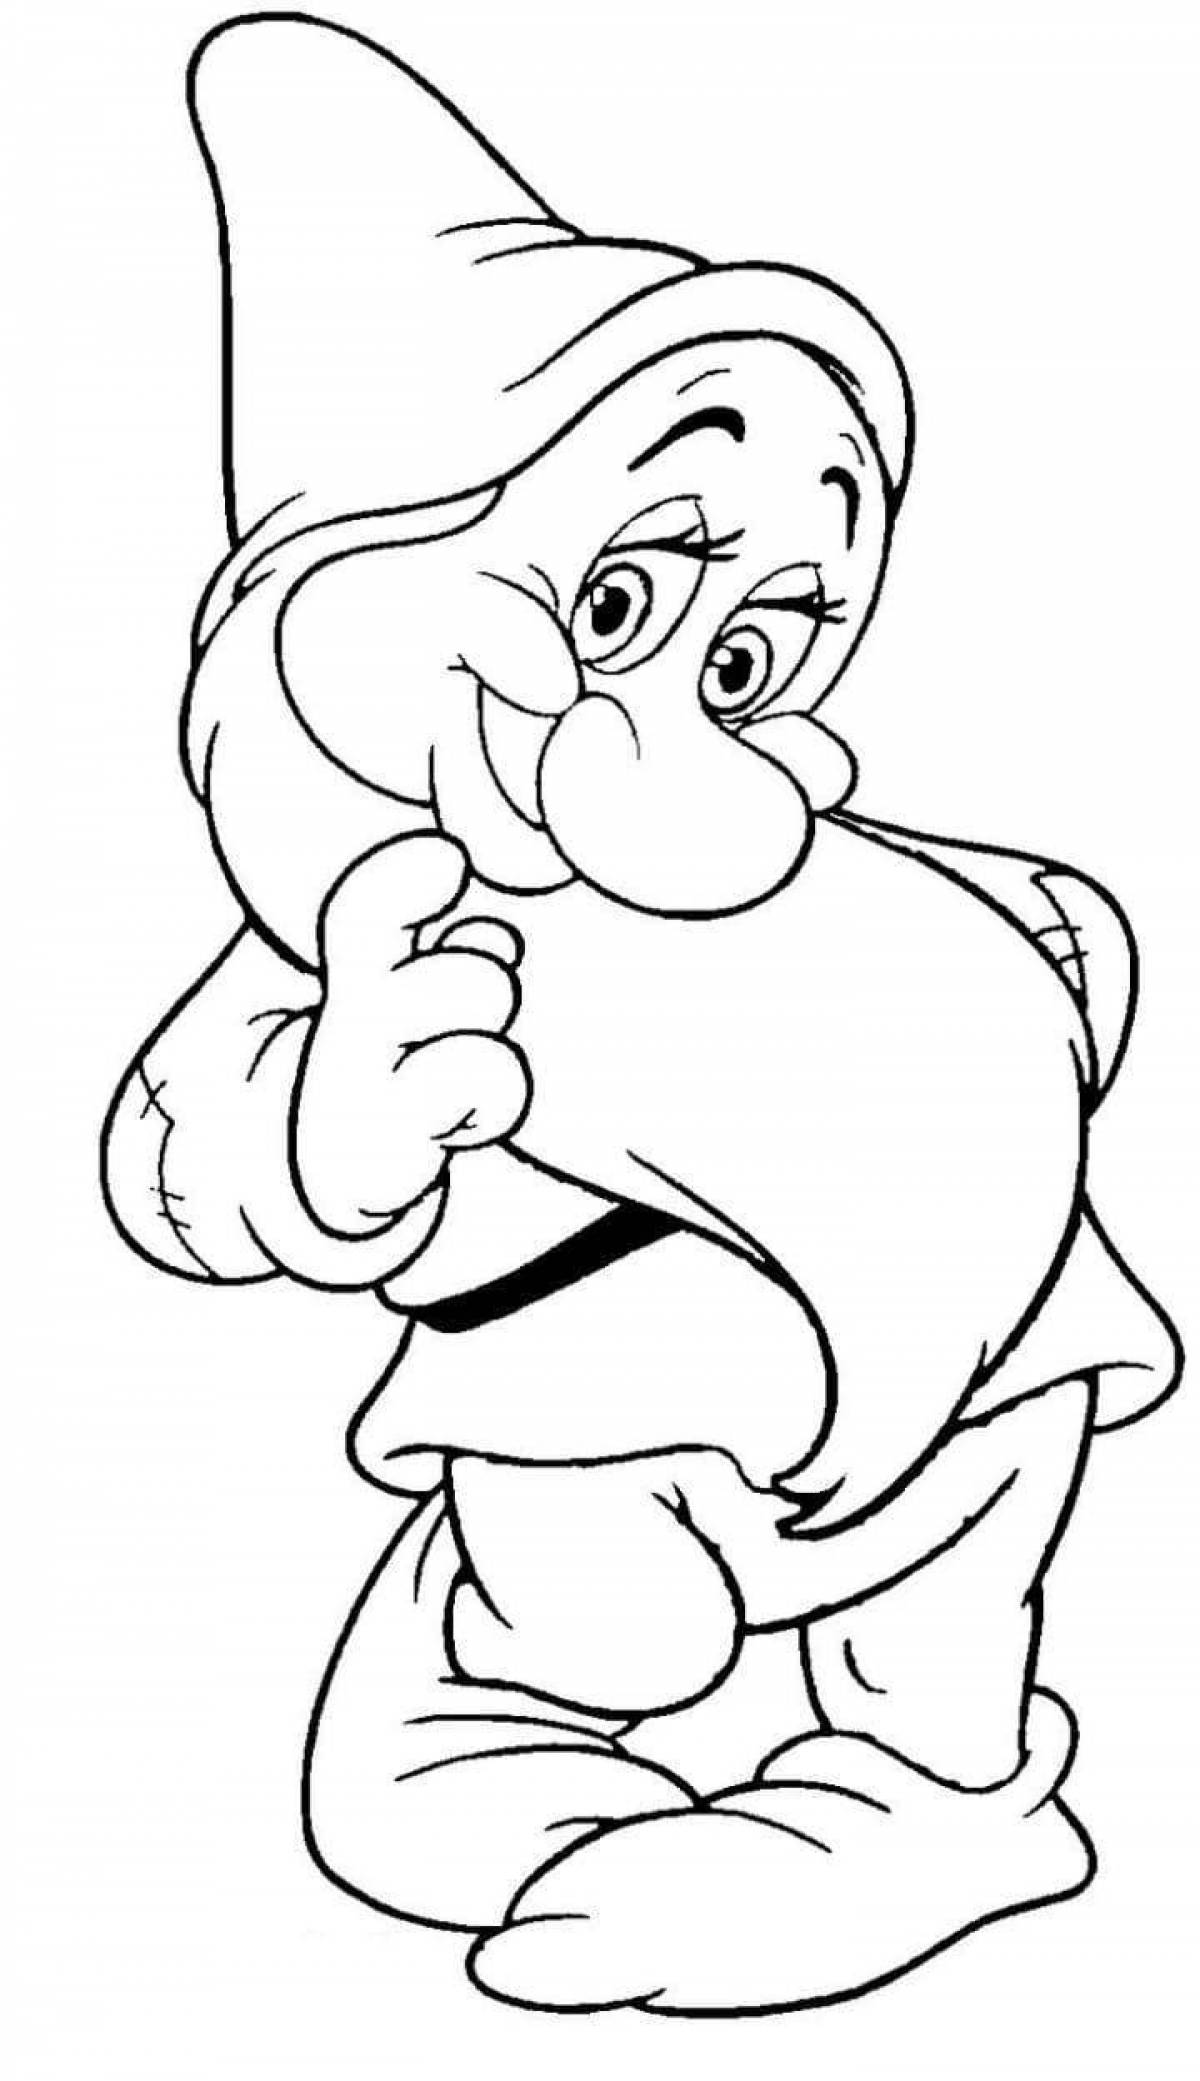 Funny gnome coloring pages